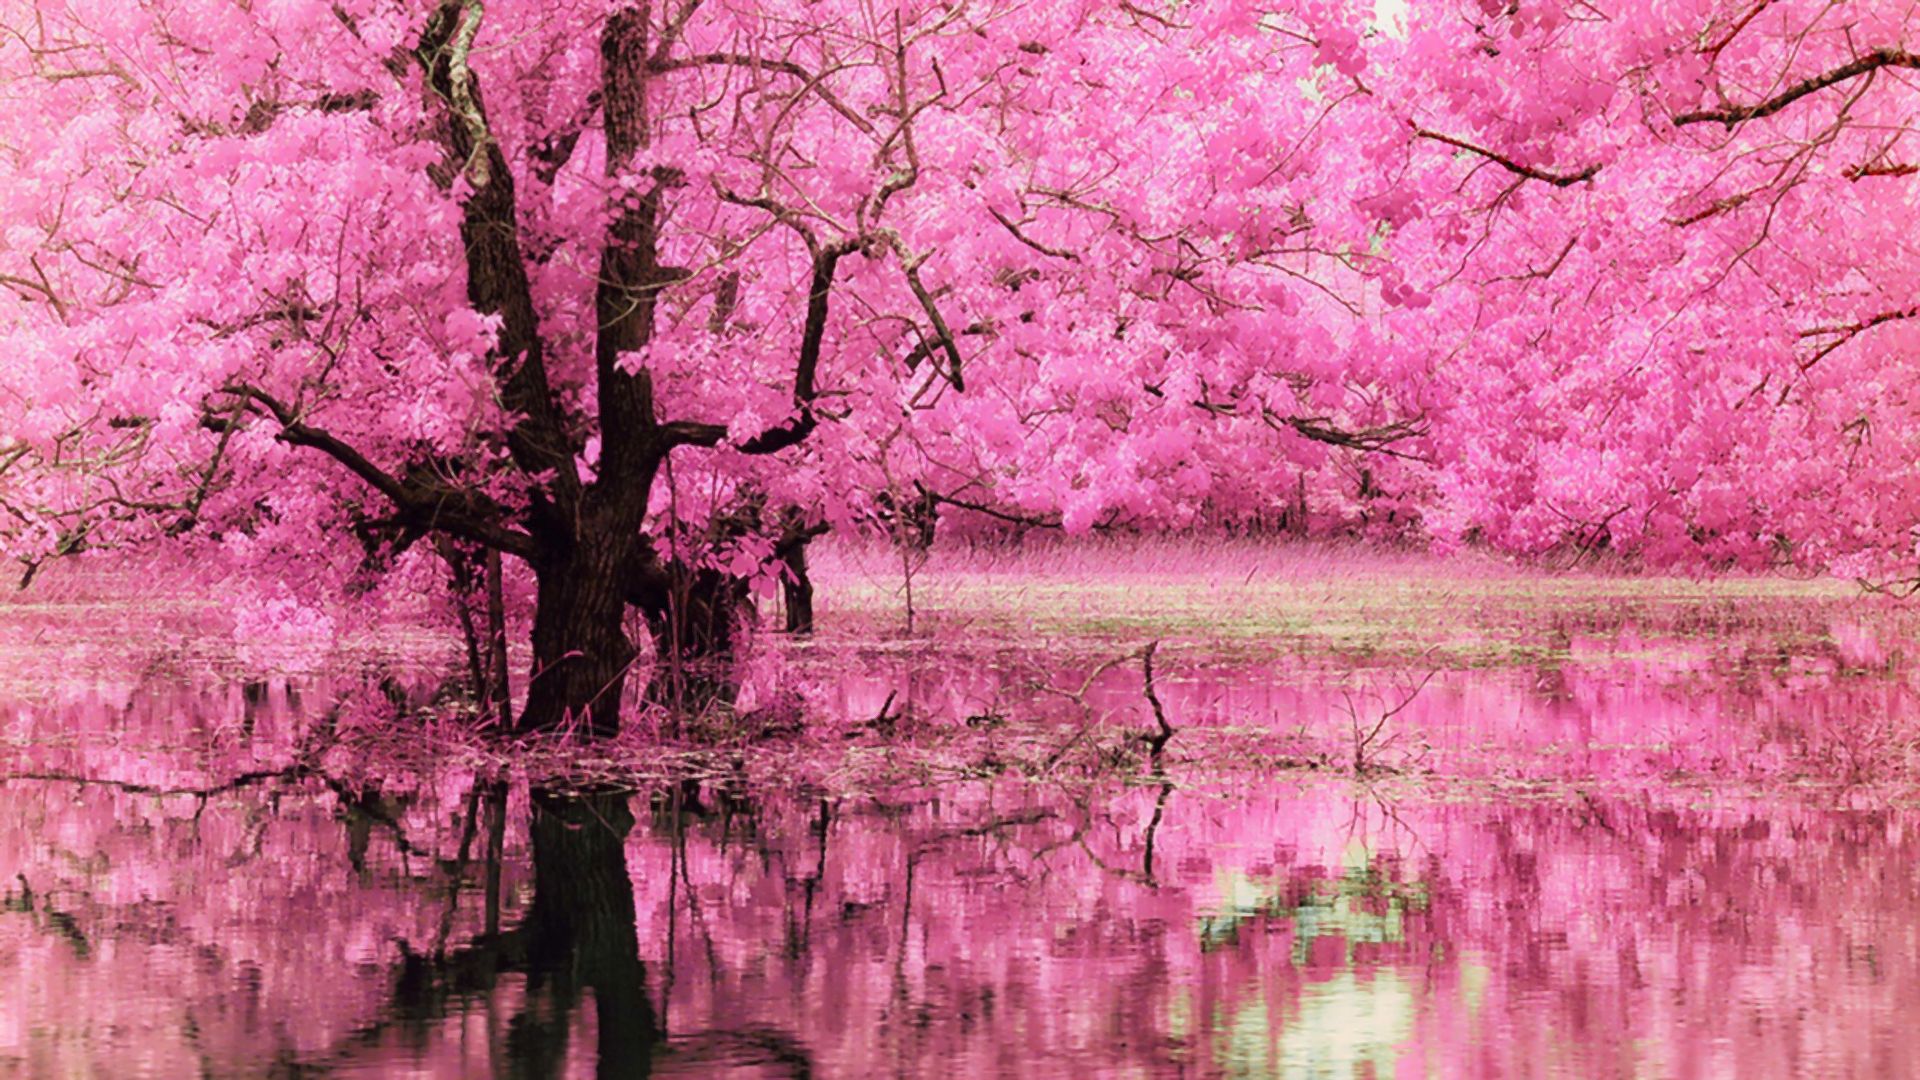 trees, pink flower, nature, blossom, earth, tree, dogwood, pond, reflection